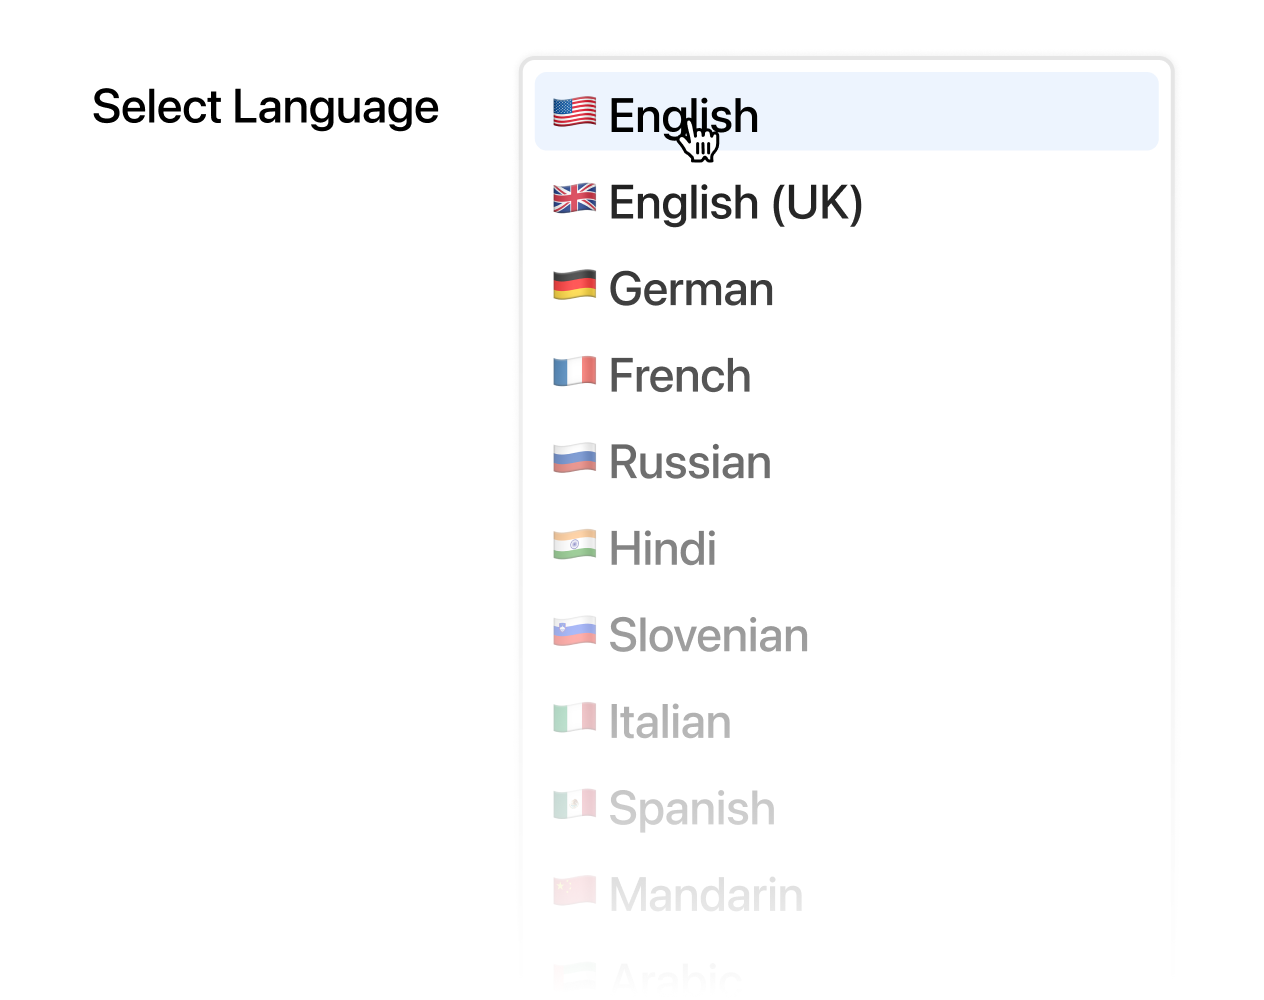 A list of languages that can be used to generate content